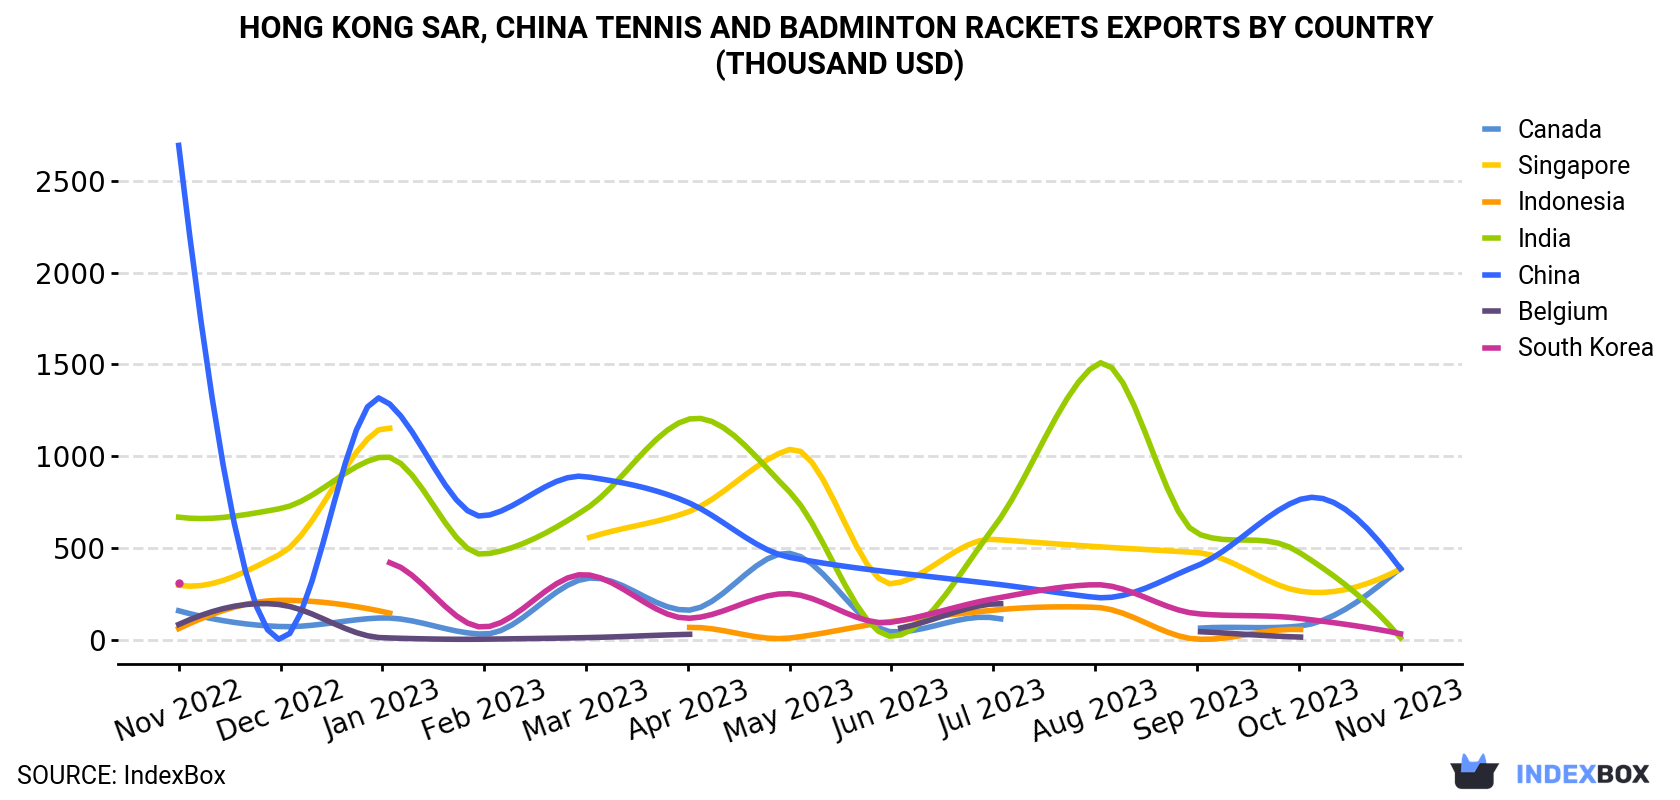 Hong Kong Tennis And Badminton Rackets Exports By Country (Thousand USD)